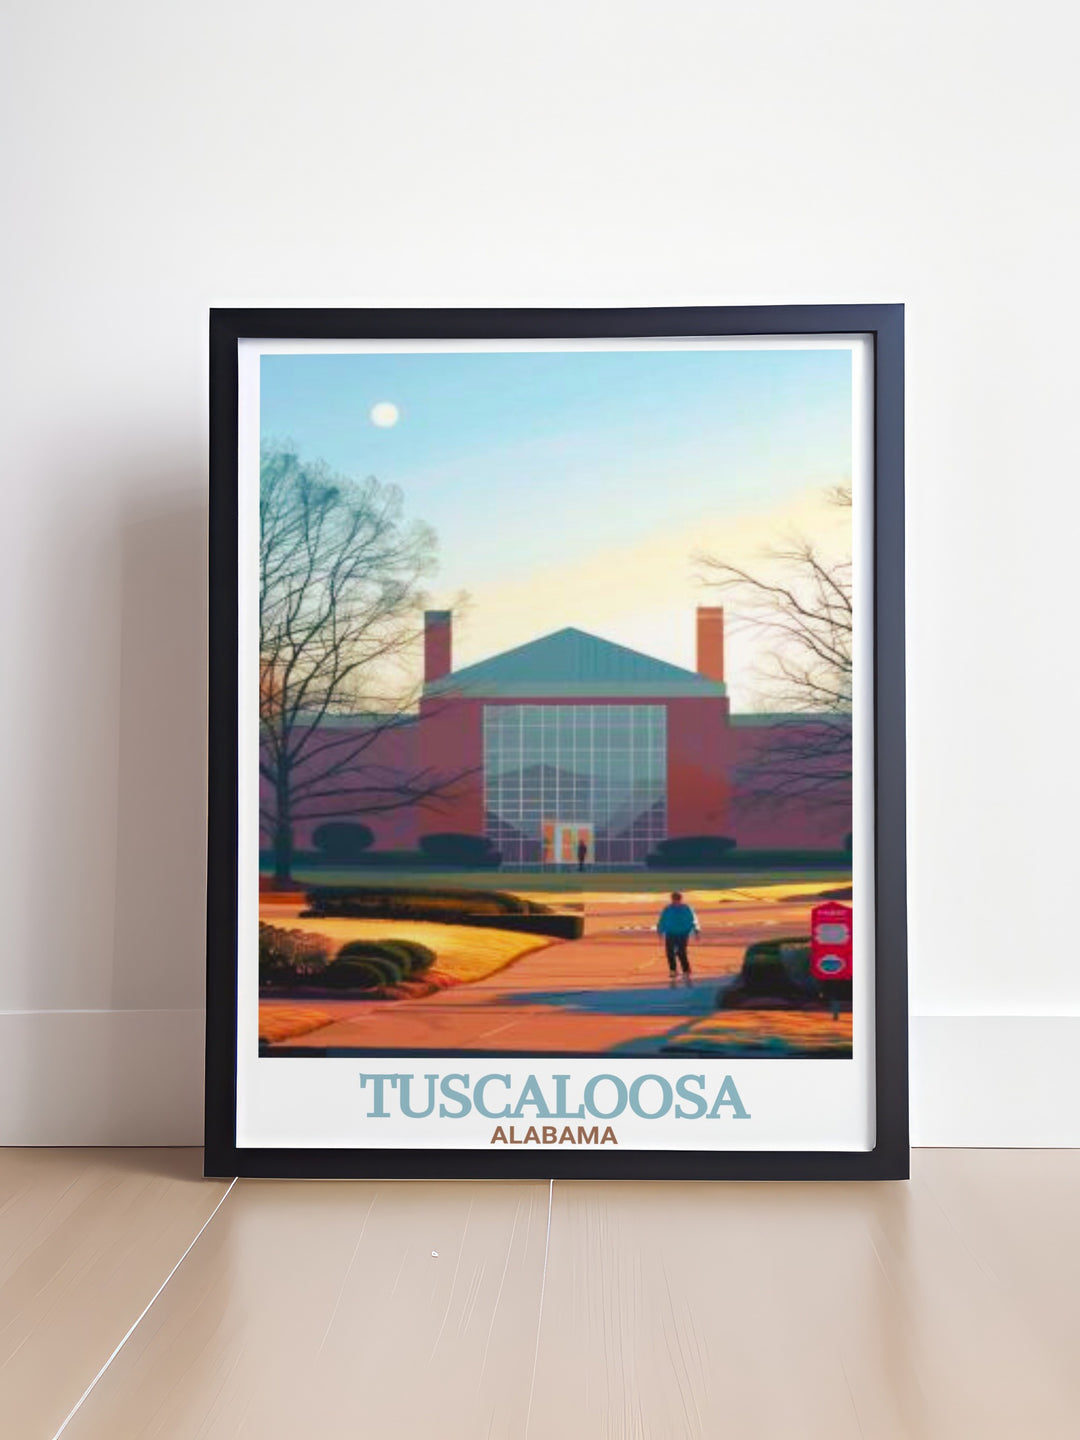 Elegant Tuscaloosa painting with Paul W. Bryant Museum and city map a perfect piece of Tuscaloosa decor and wall art that brings the iconic landmarks of Alabama into your home ideal for gifts and enhancing any living space